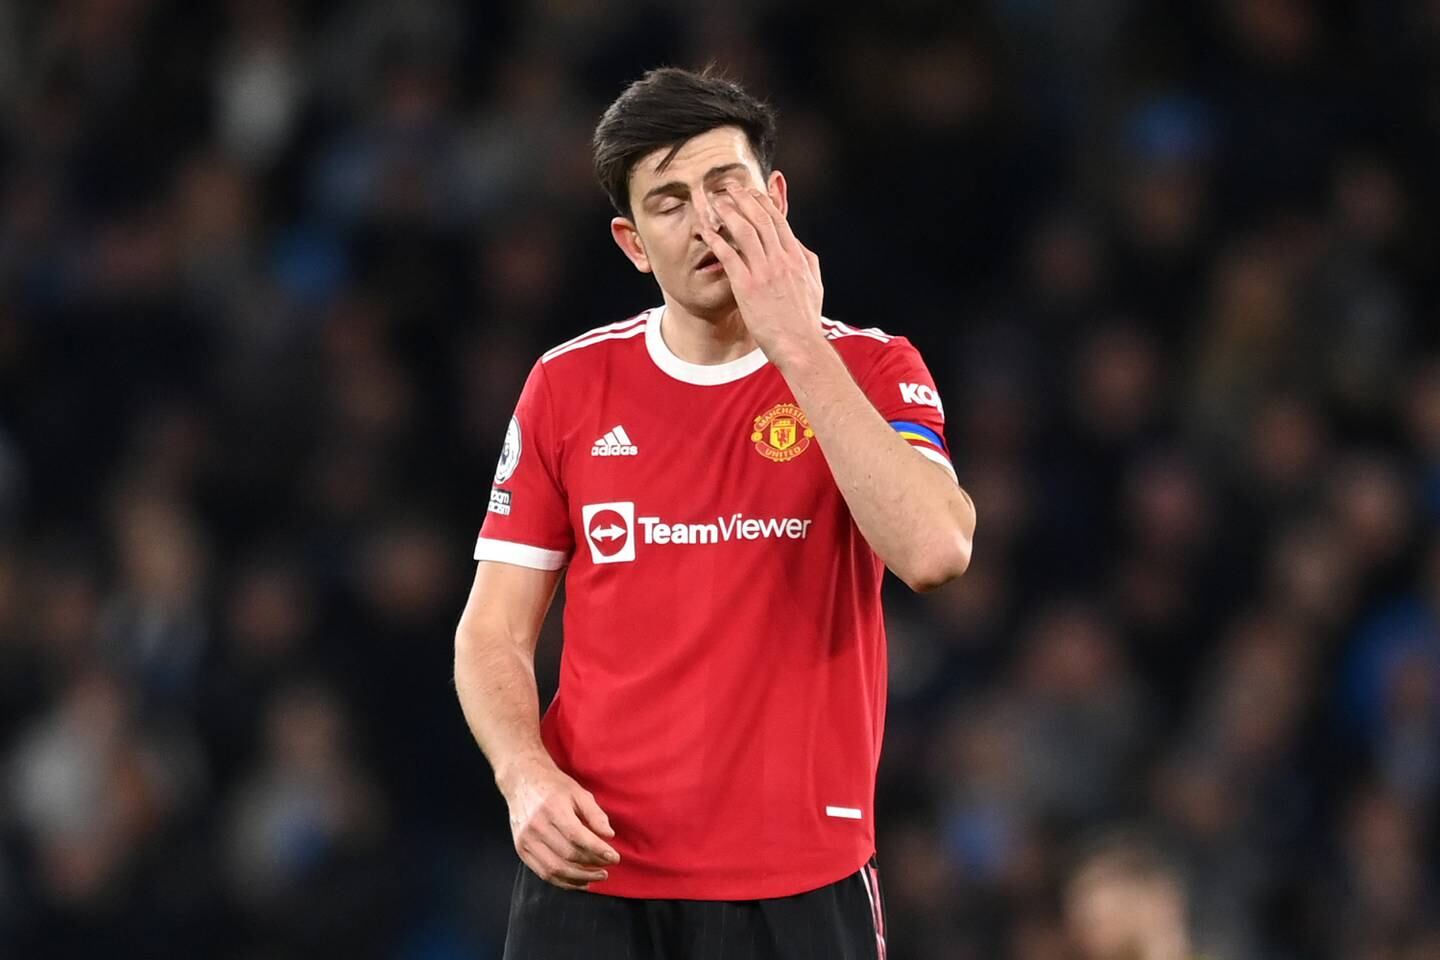 Harry Maguire has looked a haunted figure at Manchester United this season. Getty